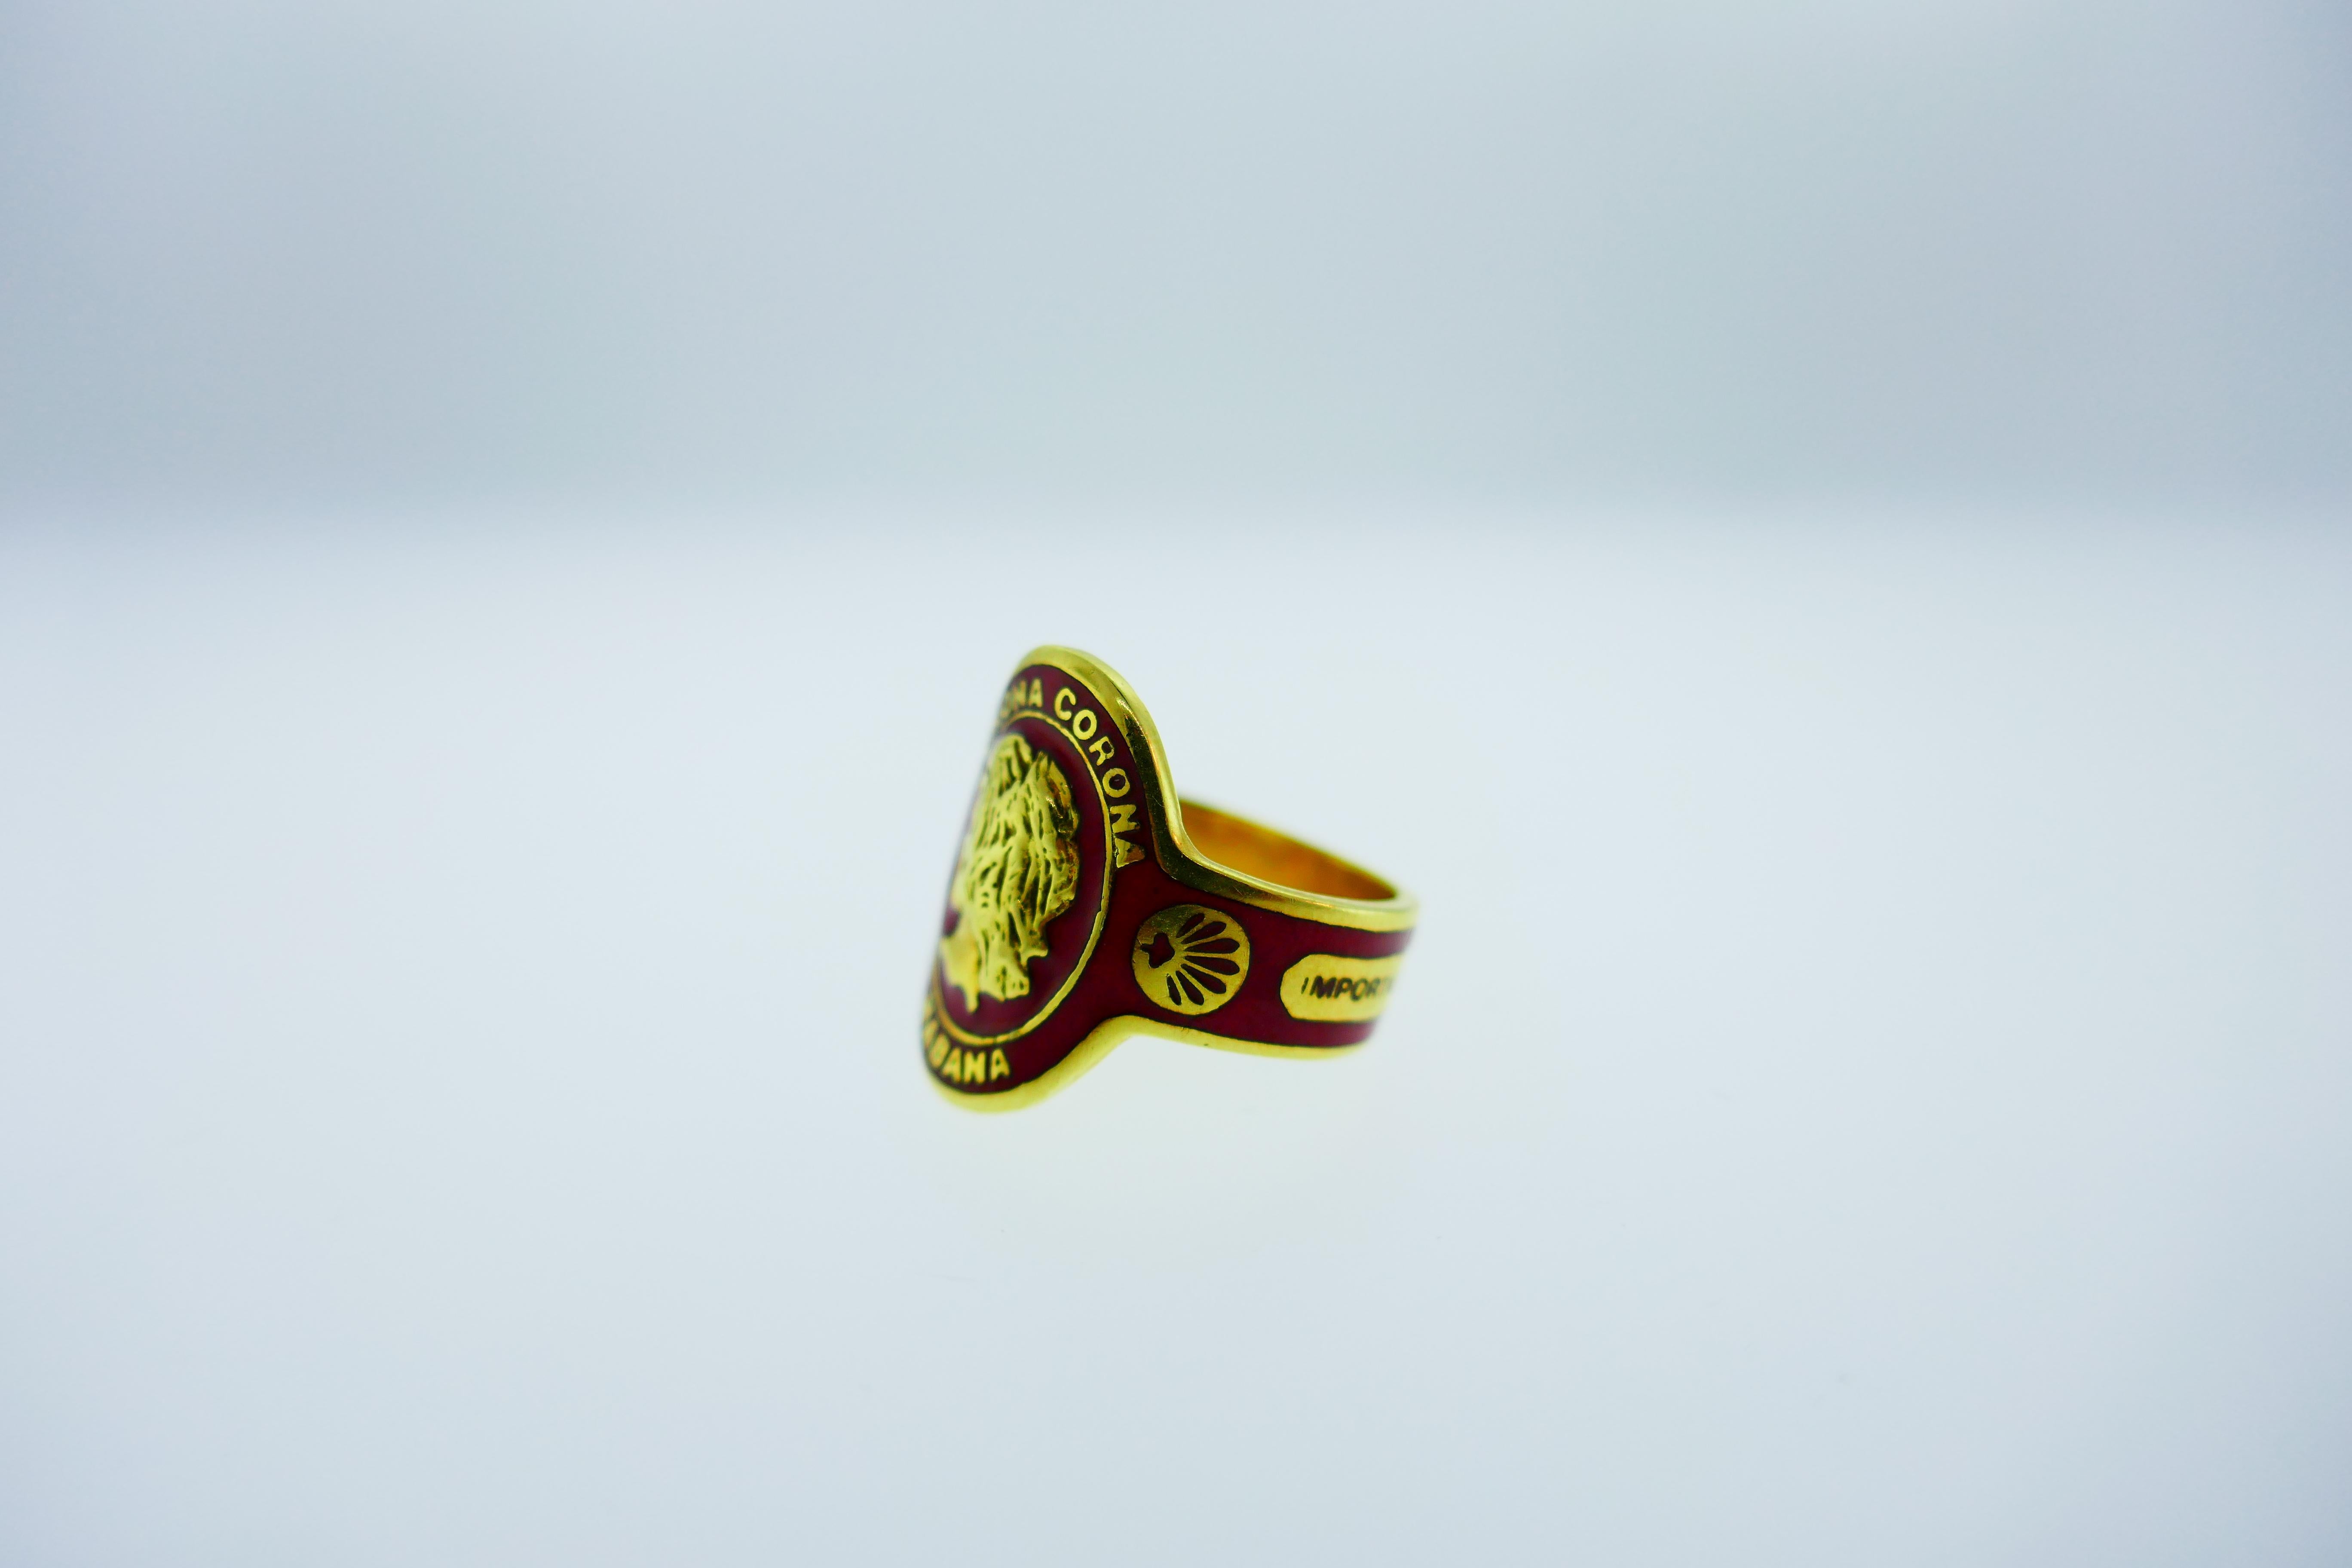 Here is your chance to purchase a beautiful and highly collectible designer ring.  Truly a great piece at a great price! 

Weight: 5.9 grams 

Dimensions: 3/4